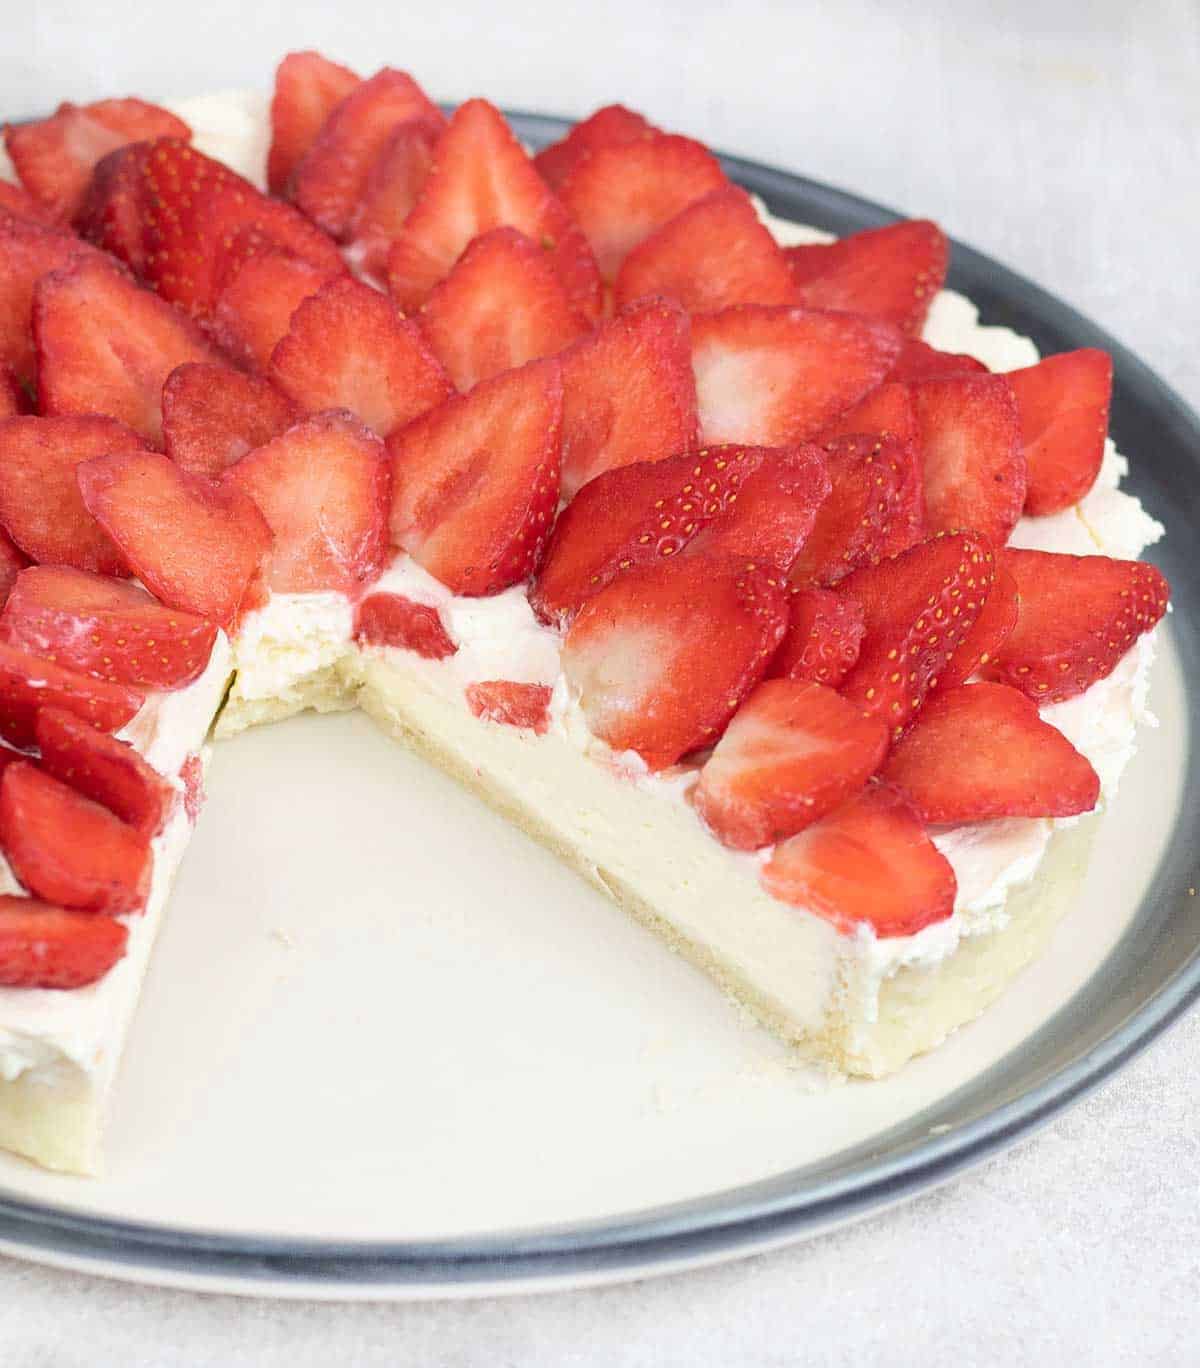 Easy french strawberry tart in a plate.